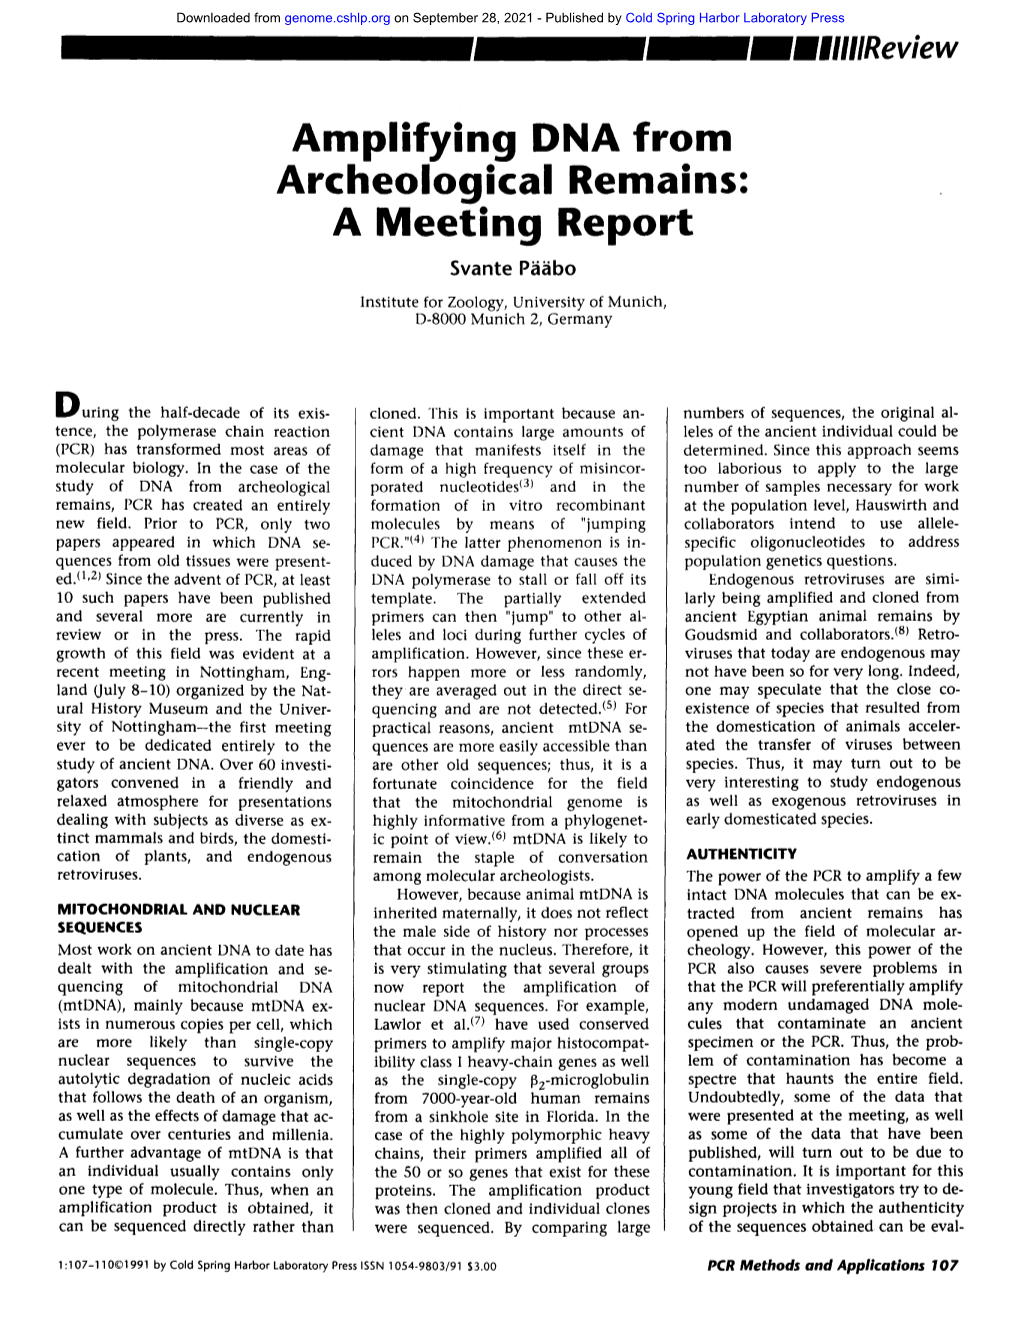 Amplifying DNA from Archeological Remains: a Meeting Report Svante P~Abo